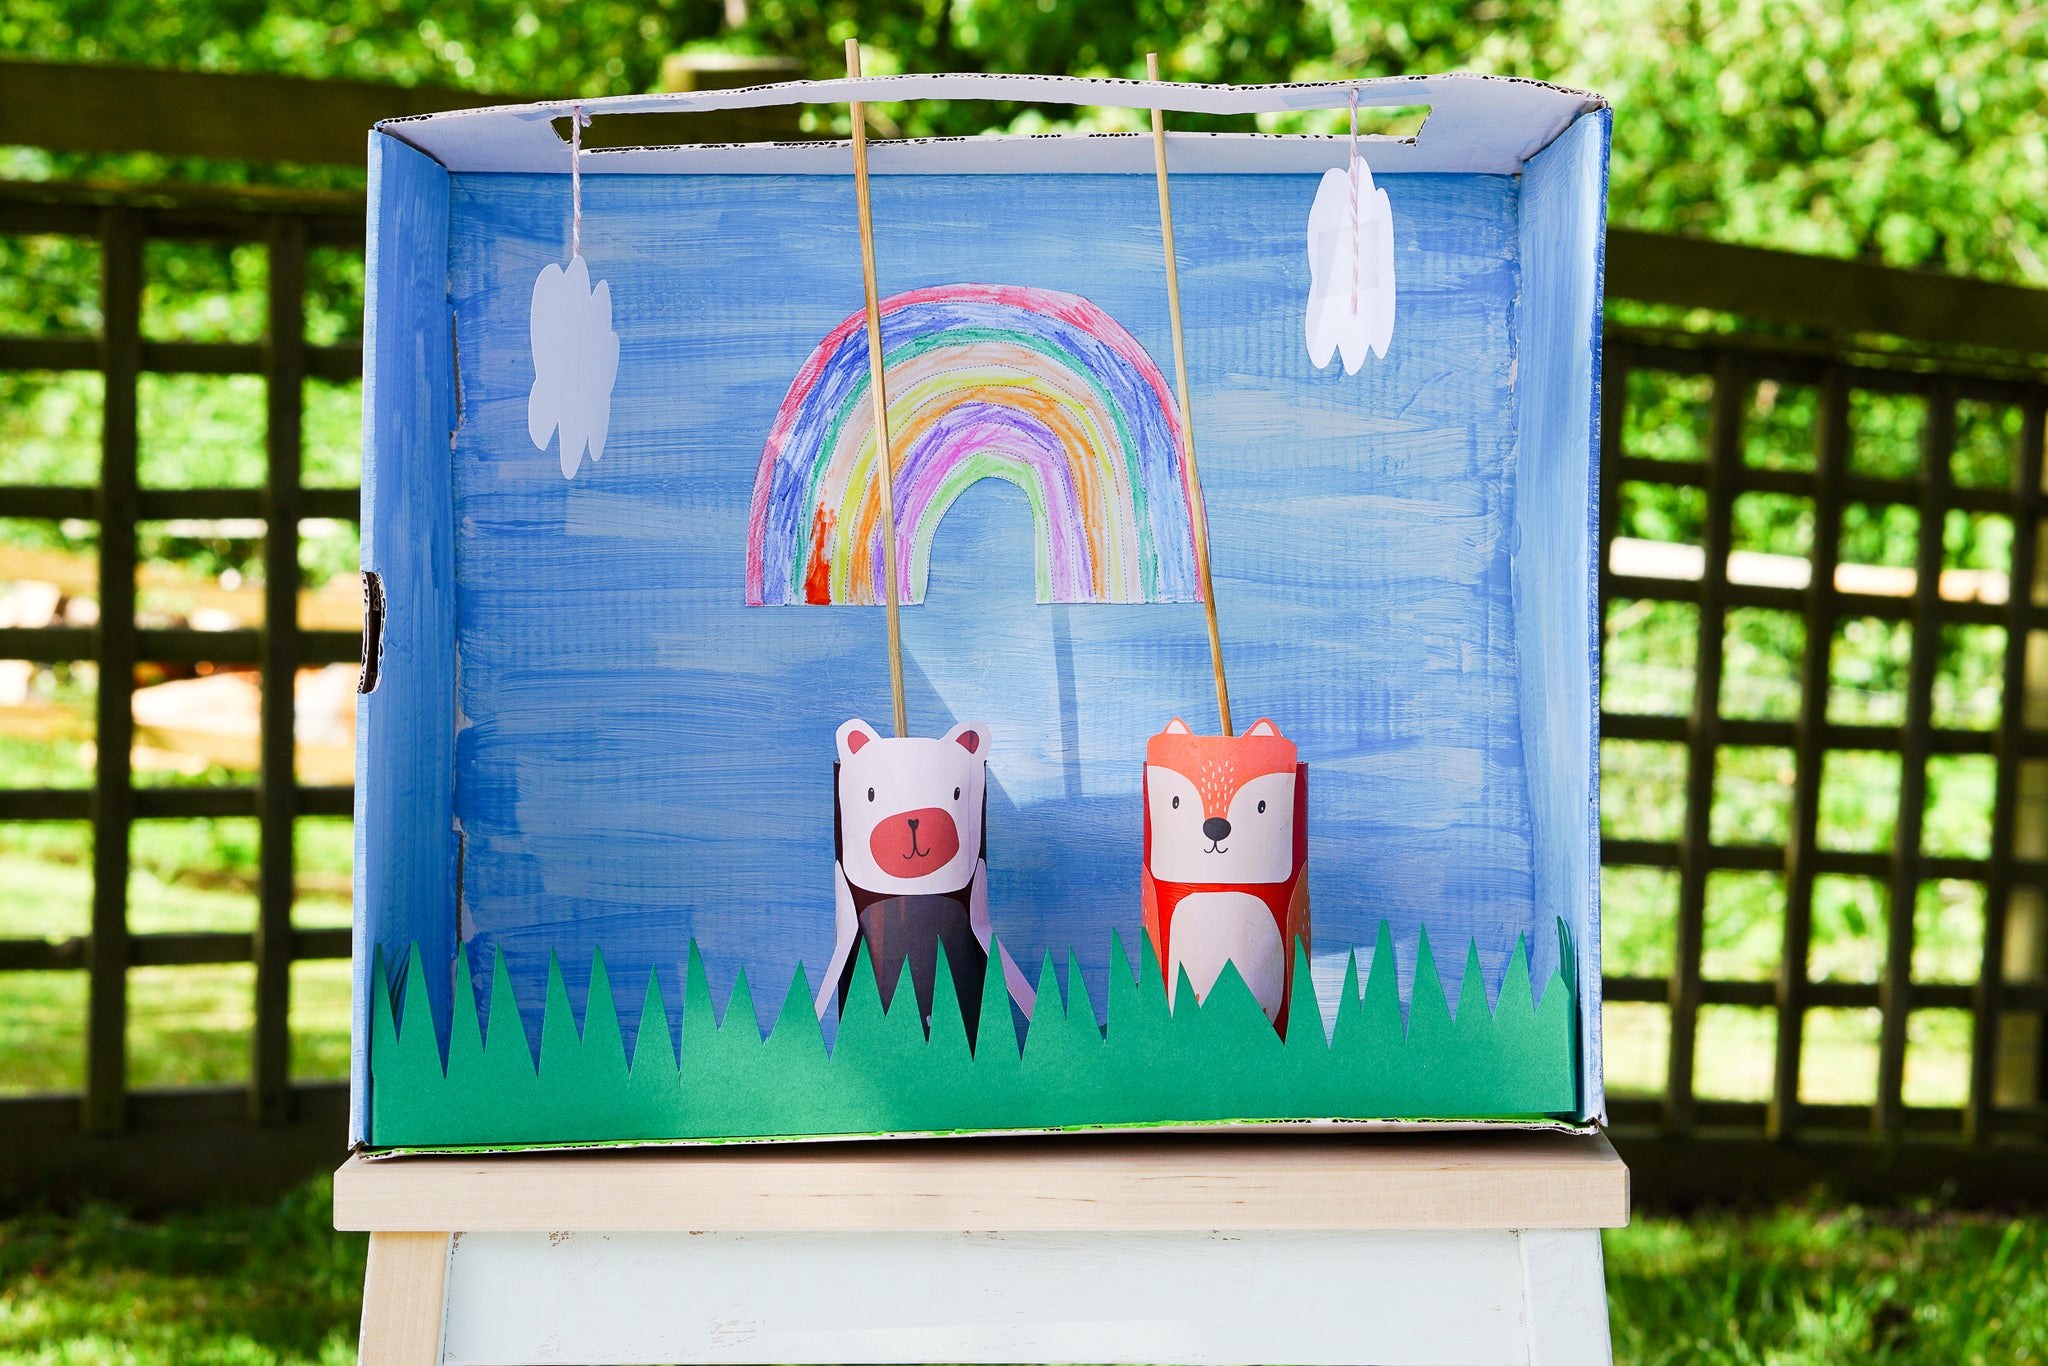 How to Make a Puppet Theatre for Children: DIY Tutorial